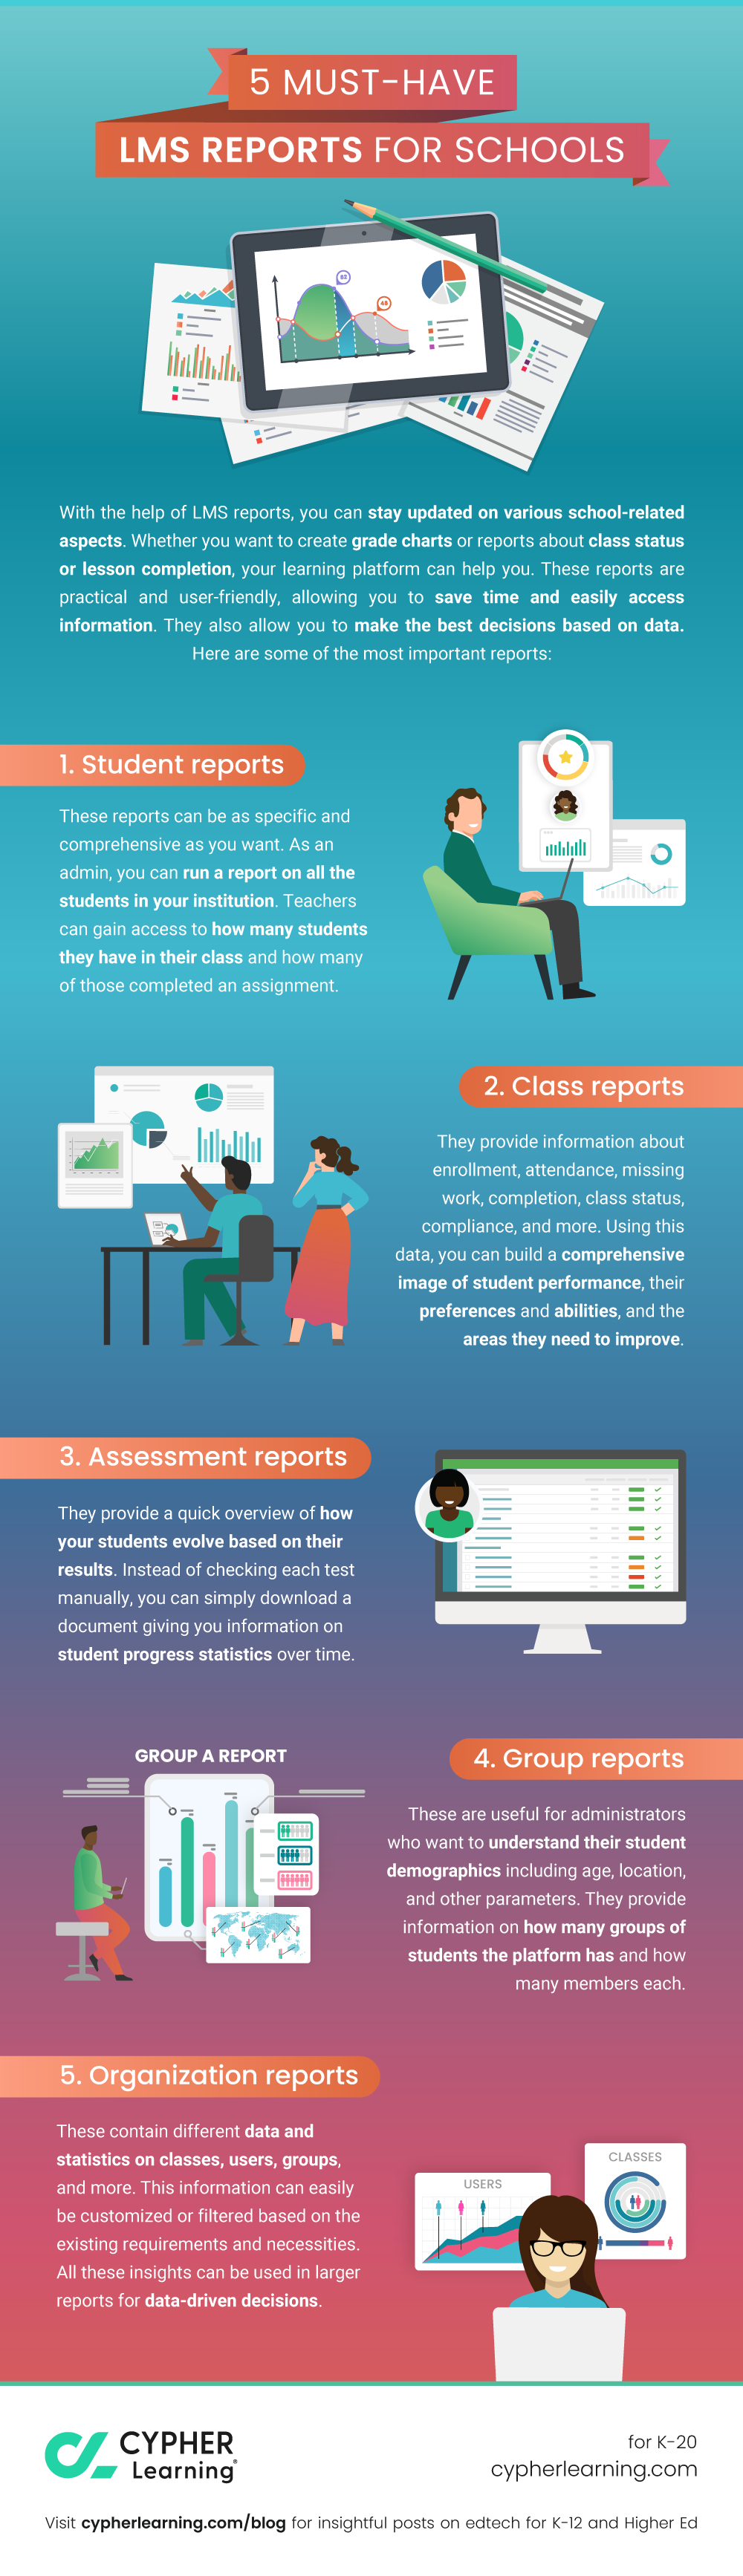 5 Must-have LMS reports for schools